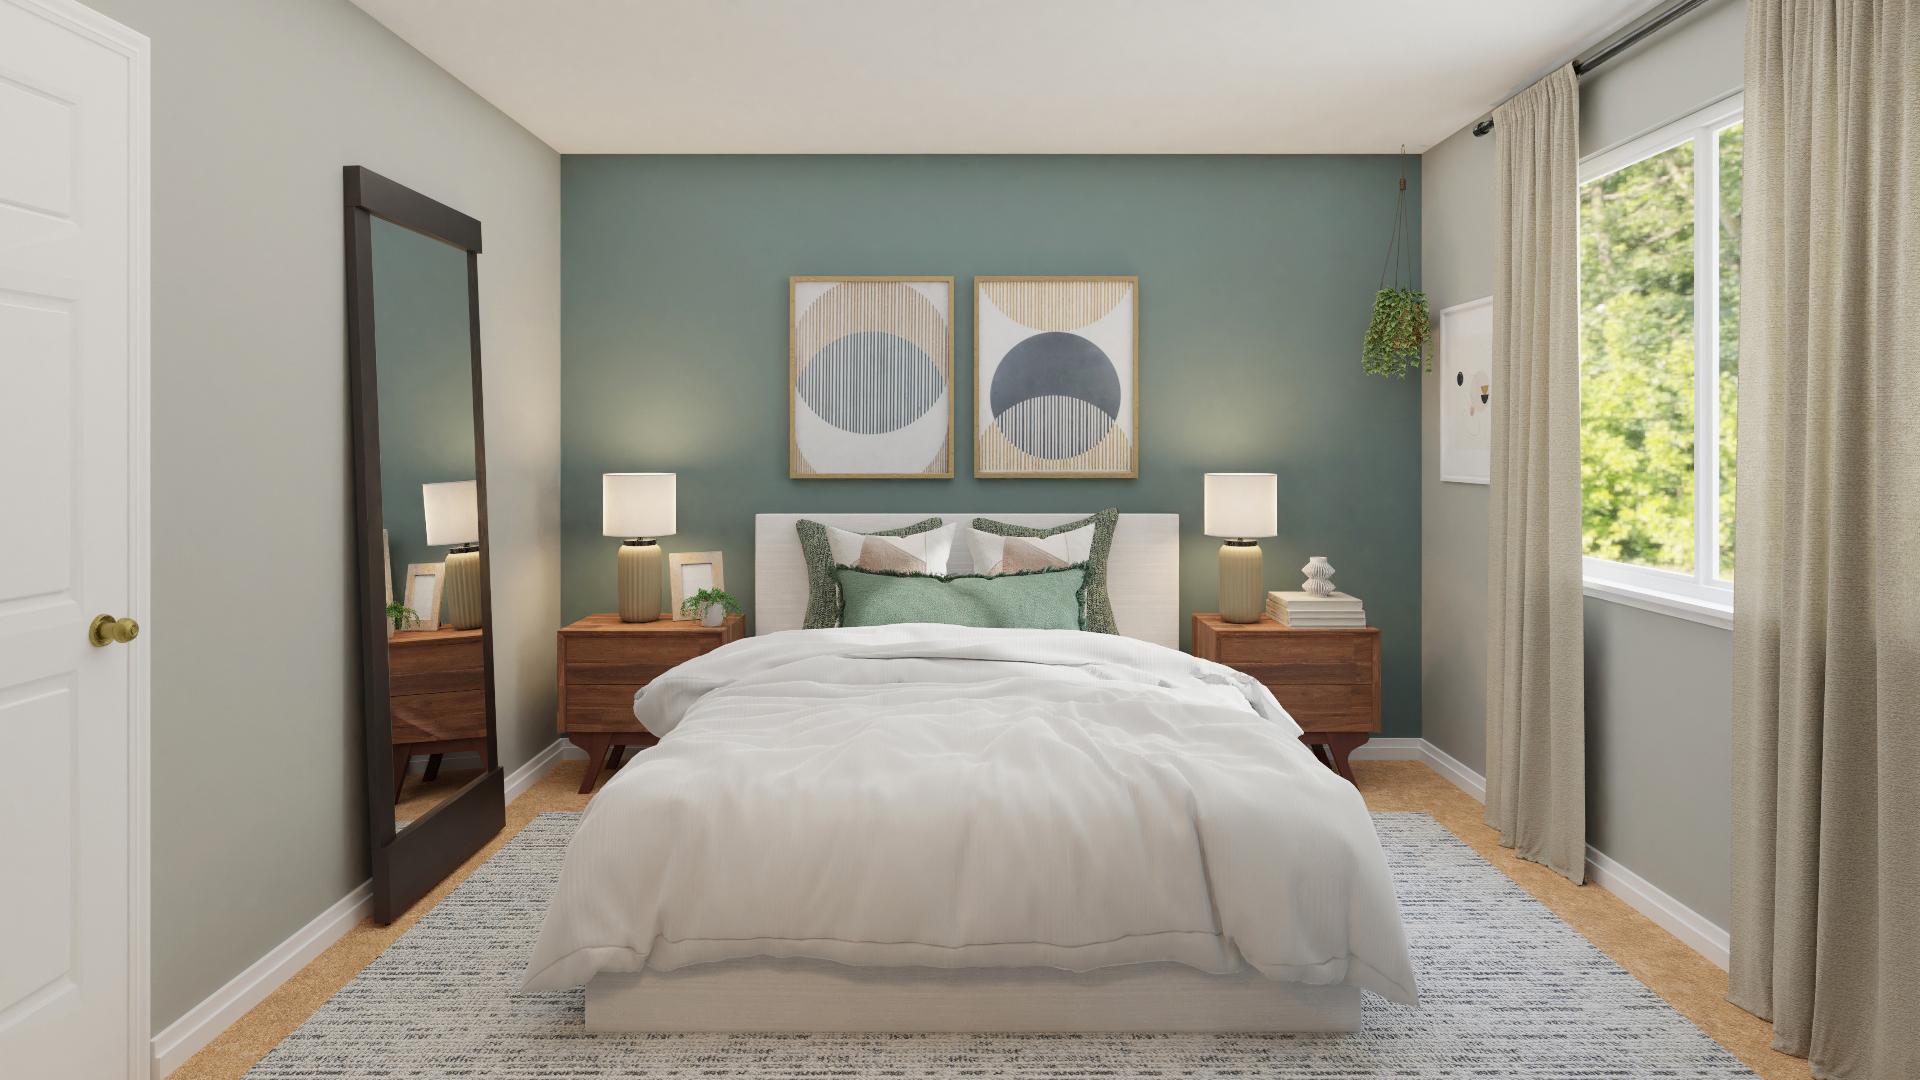 Earthy Hues Bring Life To This Mid-Century Modern Bedroom